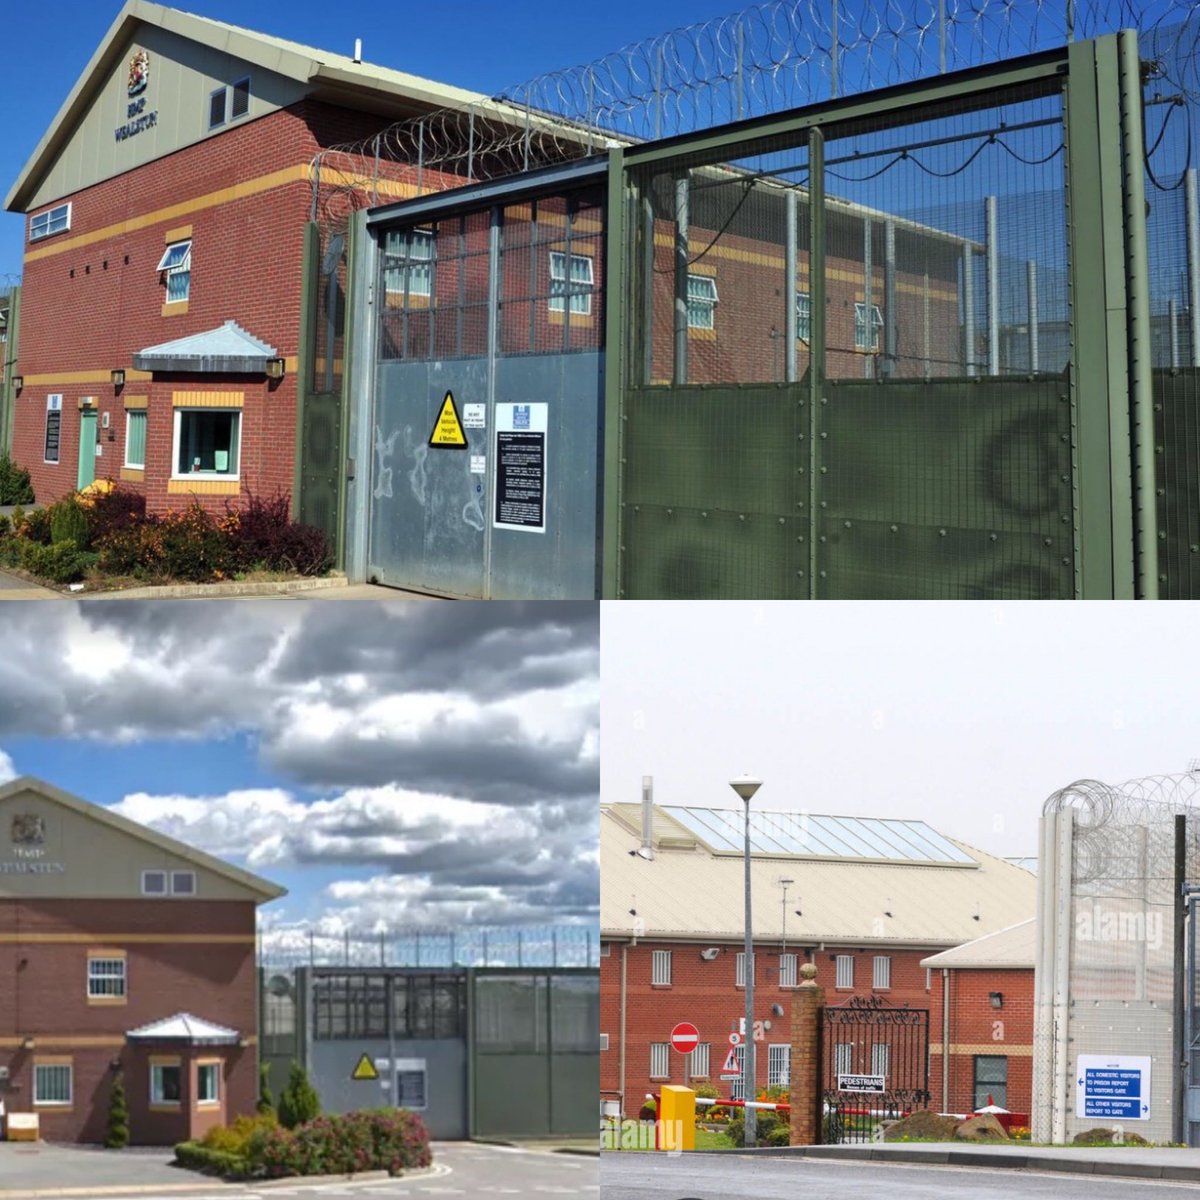 Another 6 men interview this morning at HMP Wealstun hopefully we can get them all working for us - great quality of men being put forward by the PEL hope abounds